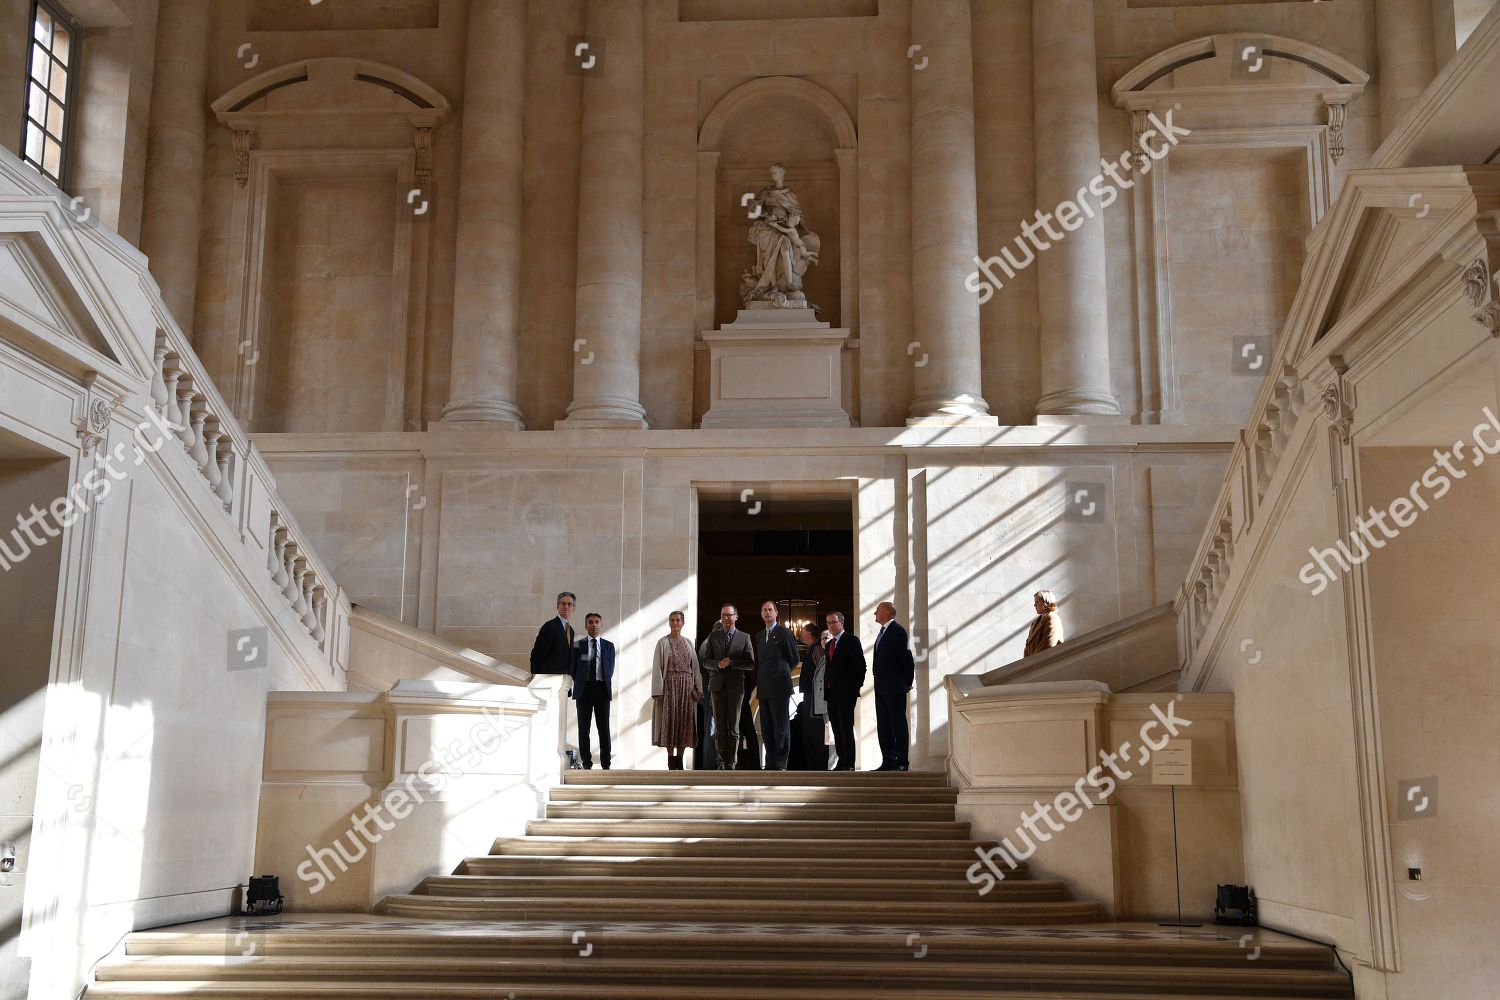 prince-edward-and-sophie-countess-of-wessex-visit-to-paris-france-shutterstock-editorial-9907868p.jpg